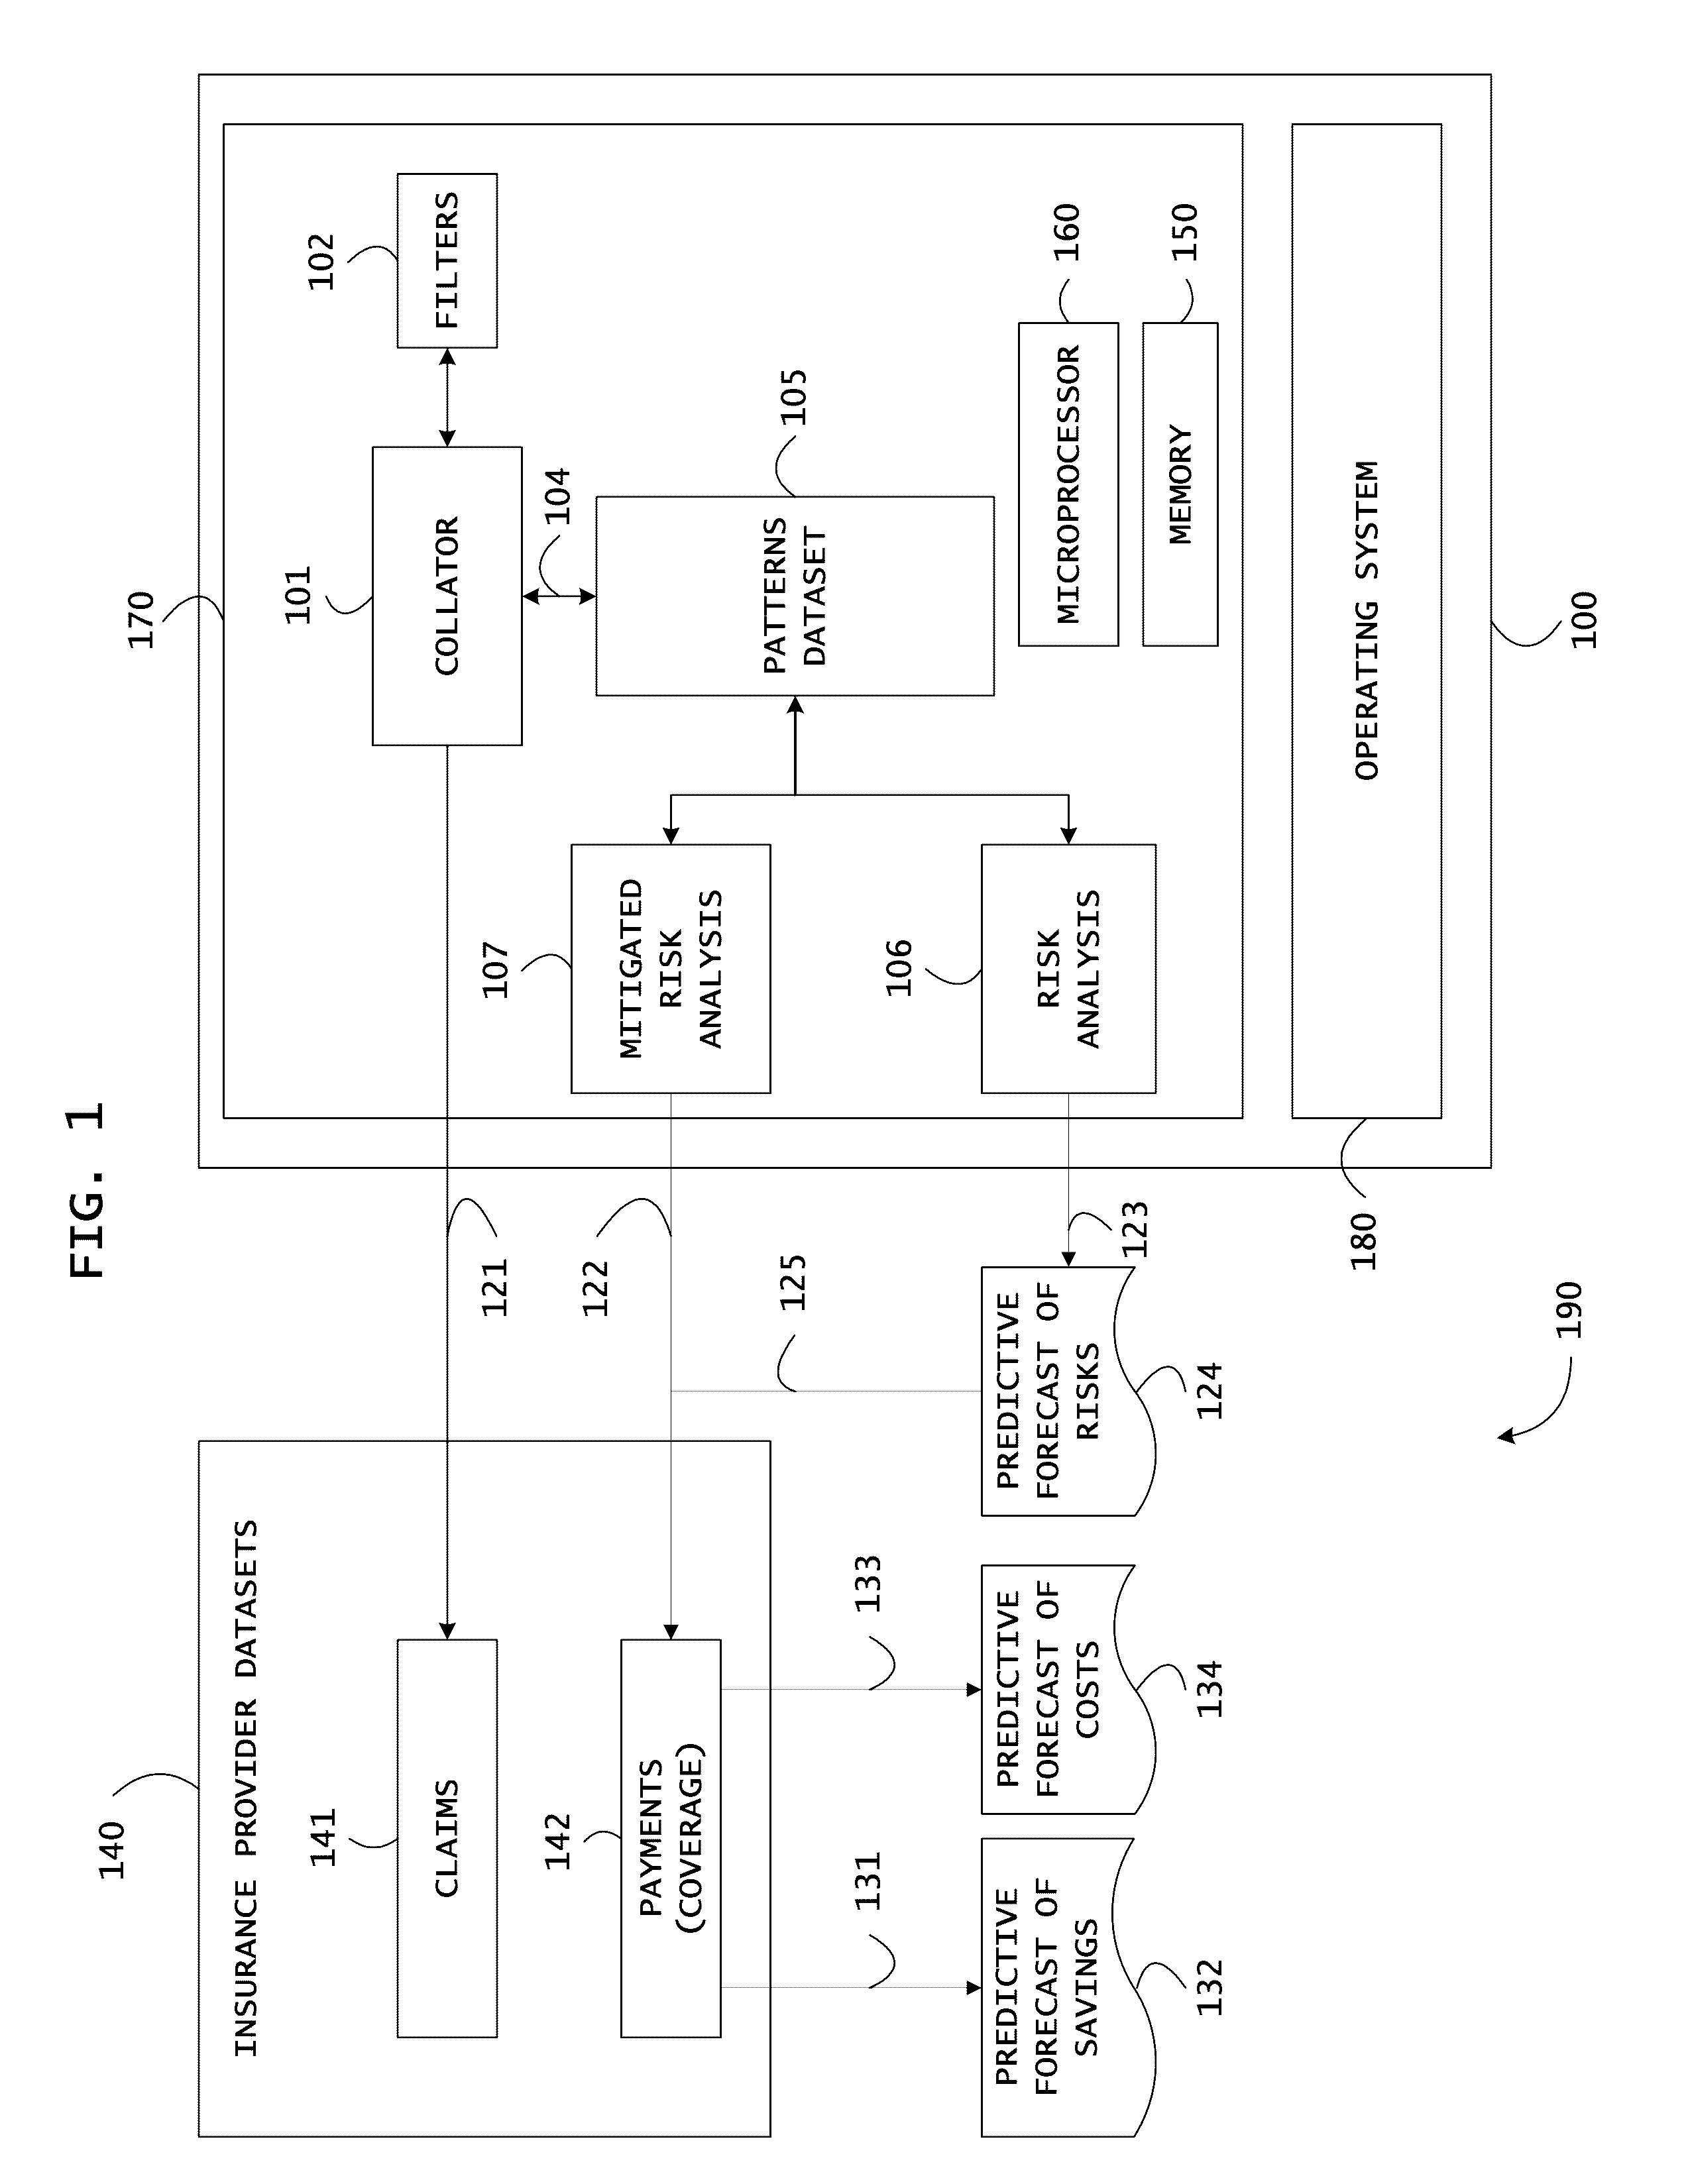 System and method to estimate reduction of lifetime healthcare costs based on body mass index